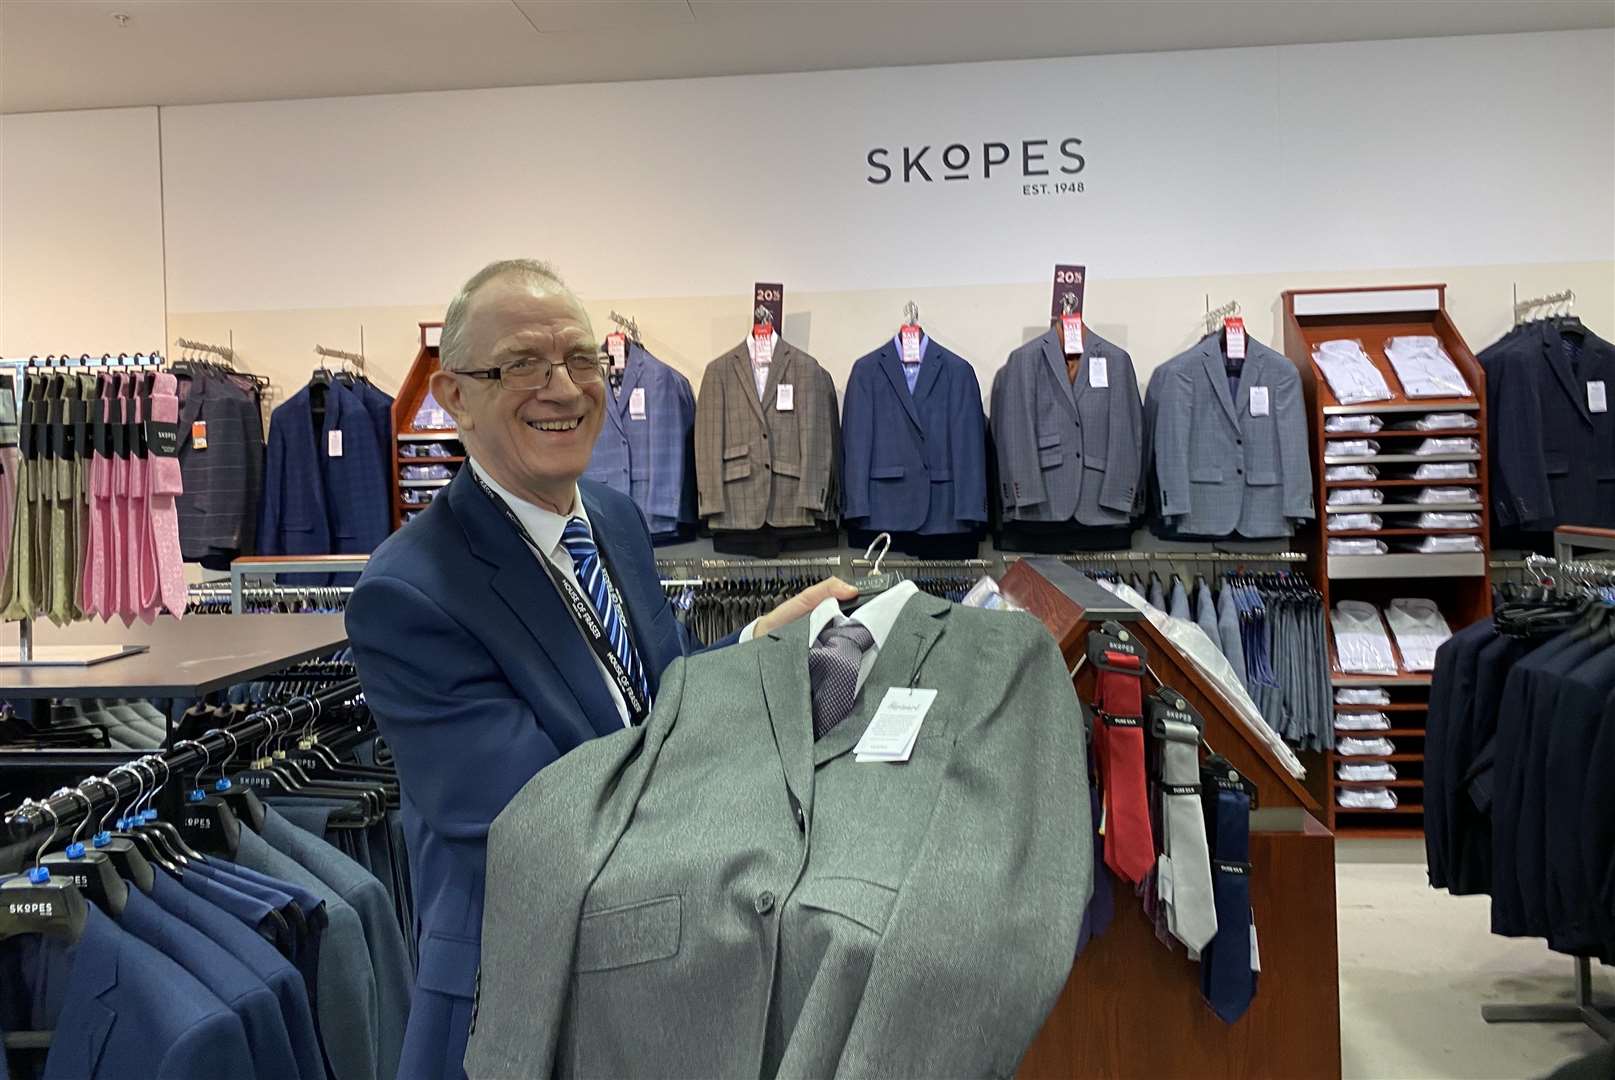 Ron has been working at Skopes in House of Fraser for three years